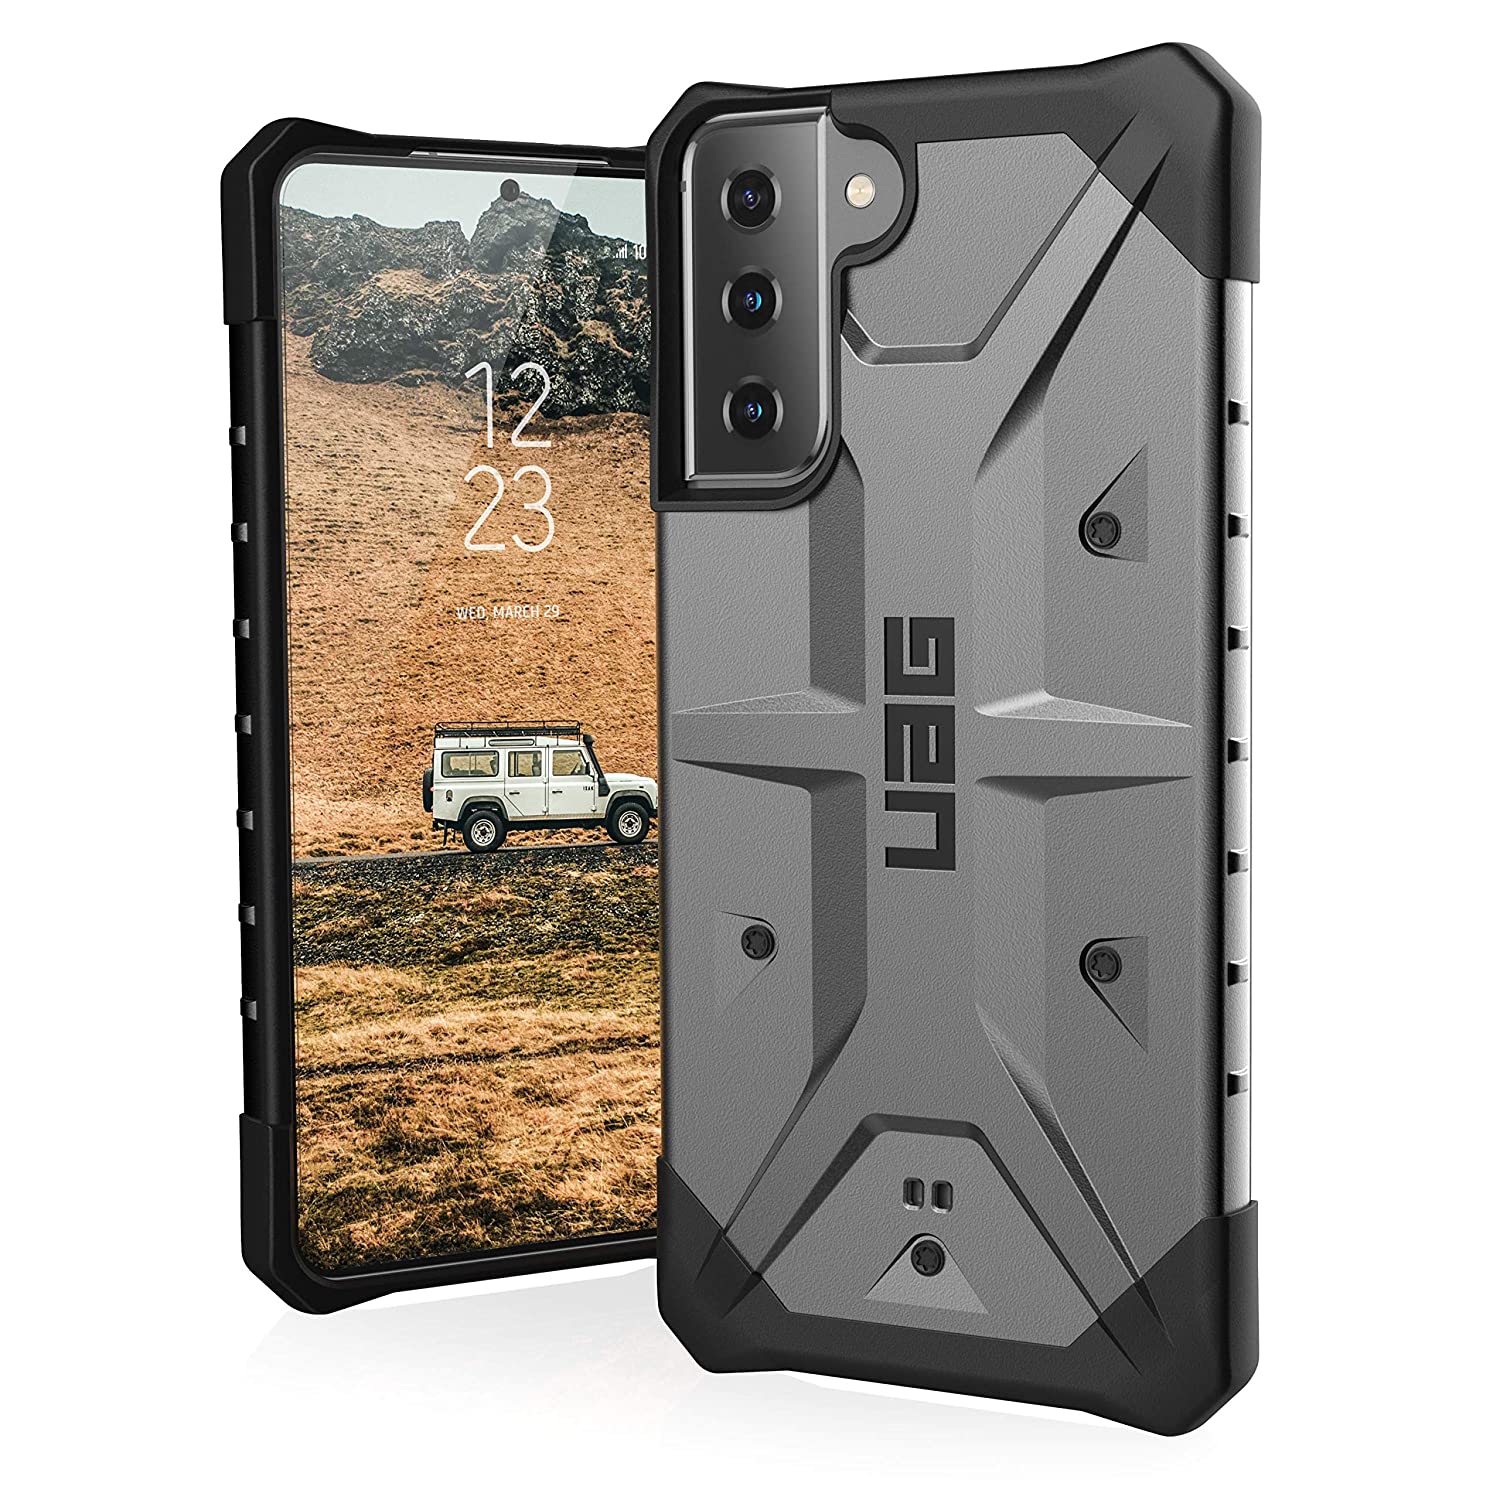 Silver 6.7-inch Screen URBAN ARMOR GEAR UAG Designed for Samsung Galaxy S21 Plus 5G Case Rugged Lightweight Slim Shockproof Pathfinder Protective Cover